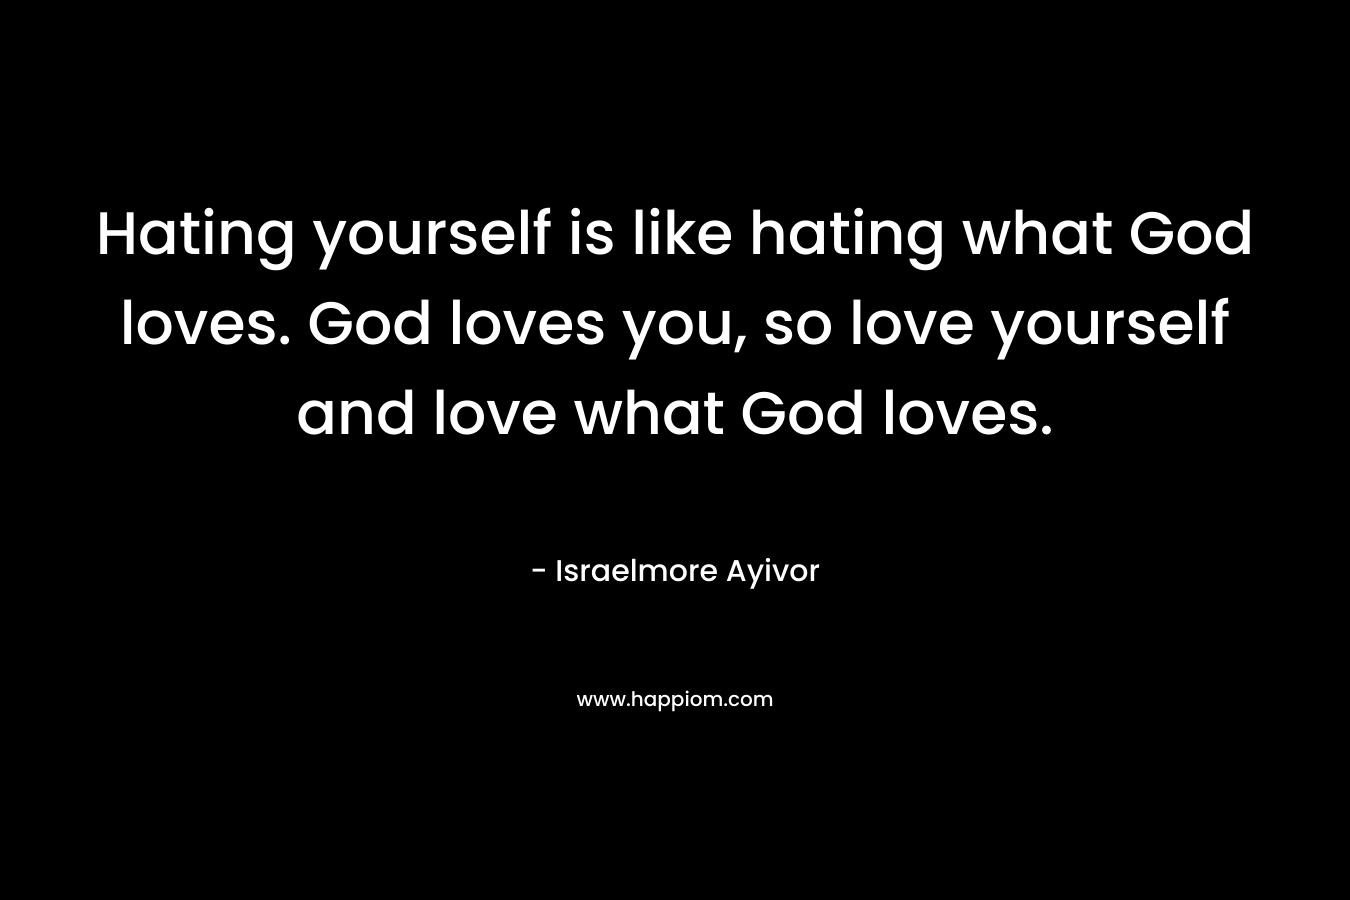 Hating yourself is like hating what God loves. God loves you, so love yourself and love what God loves.